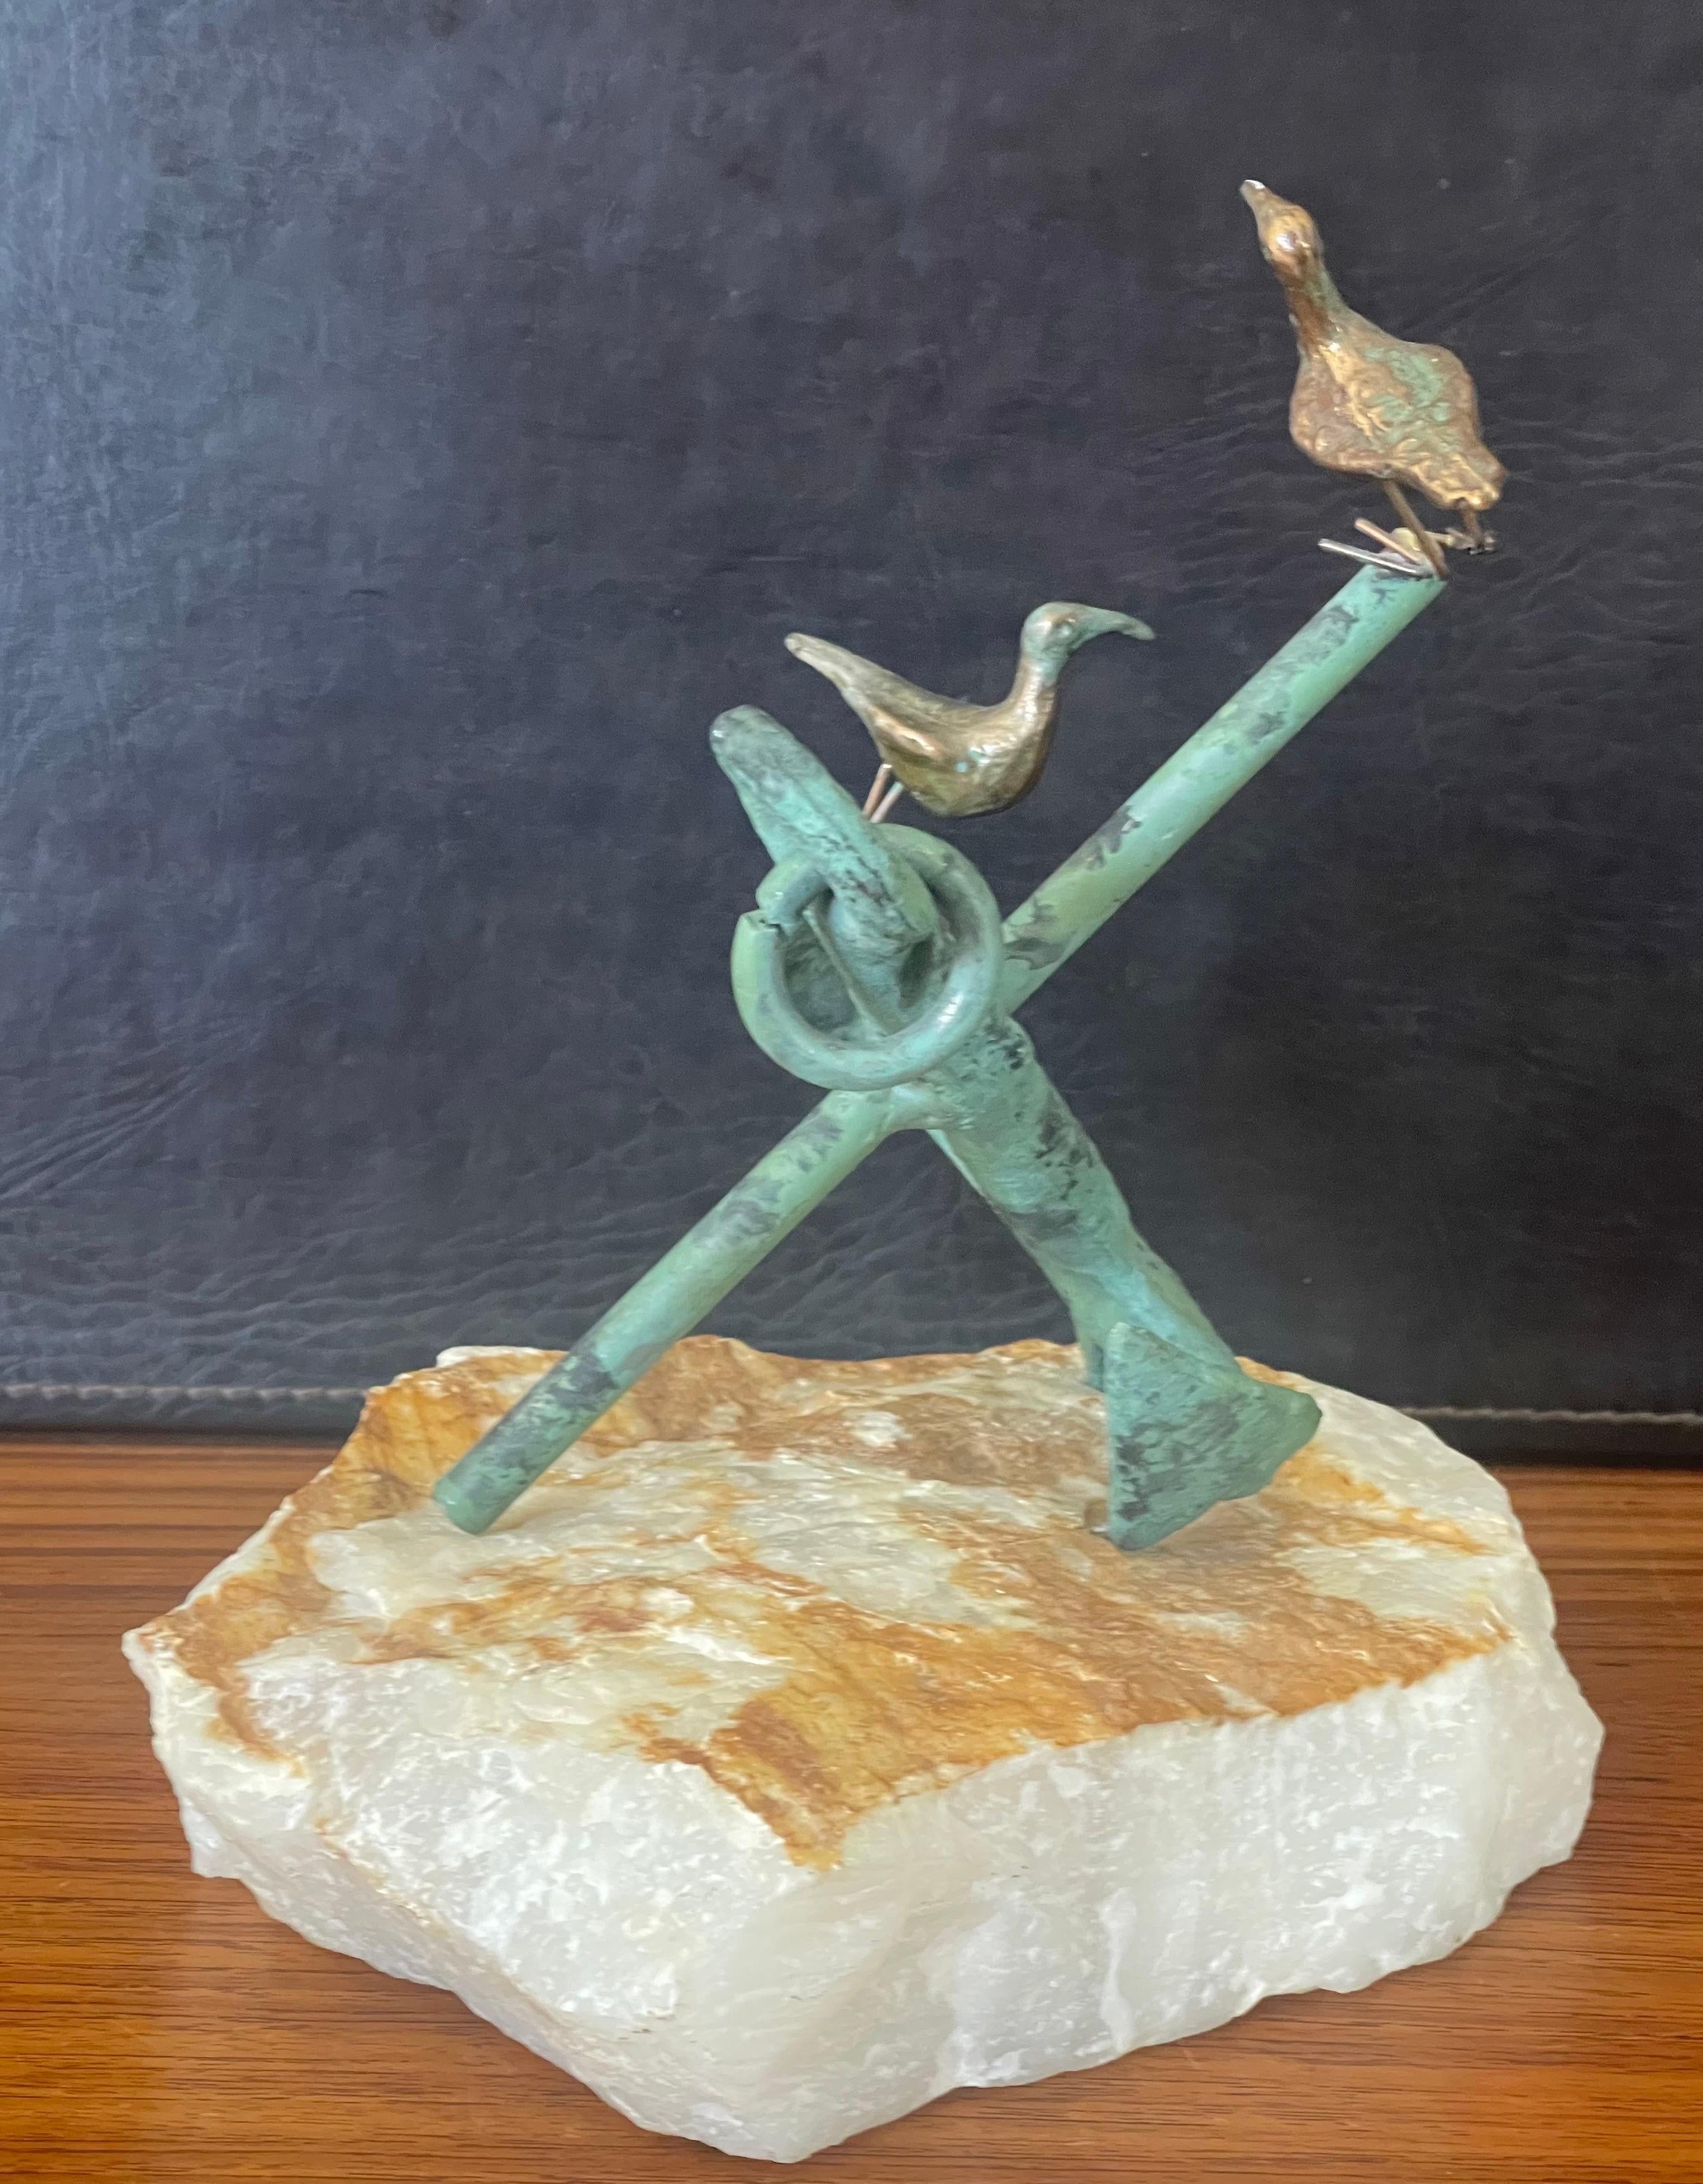 20th Century Mixed Metals on Quartz Anchor Sculpture by C. Jere for Artisian House For Sale